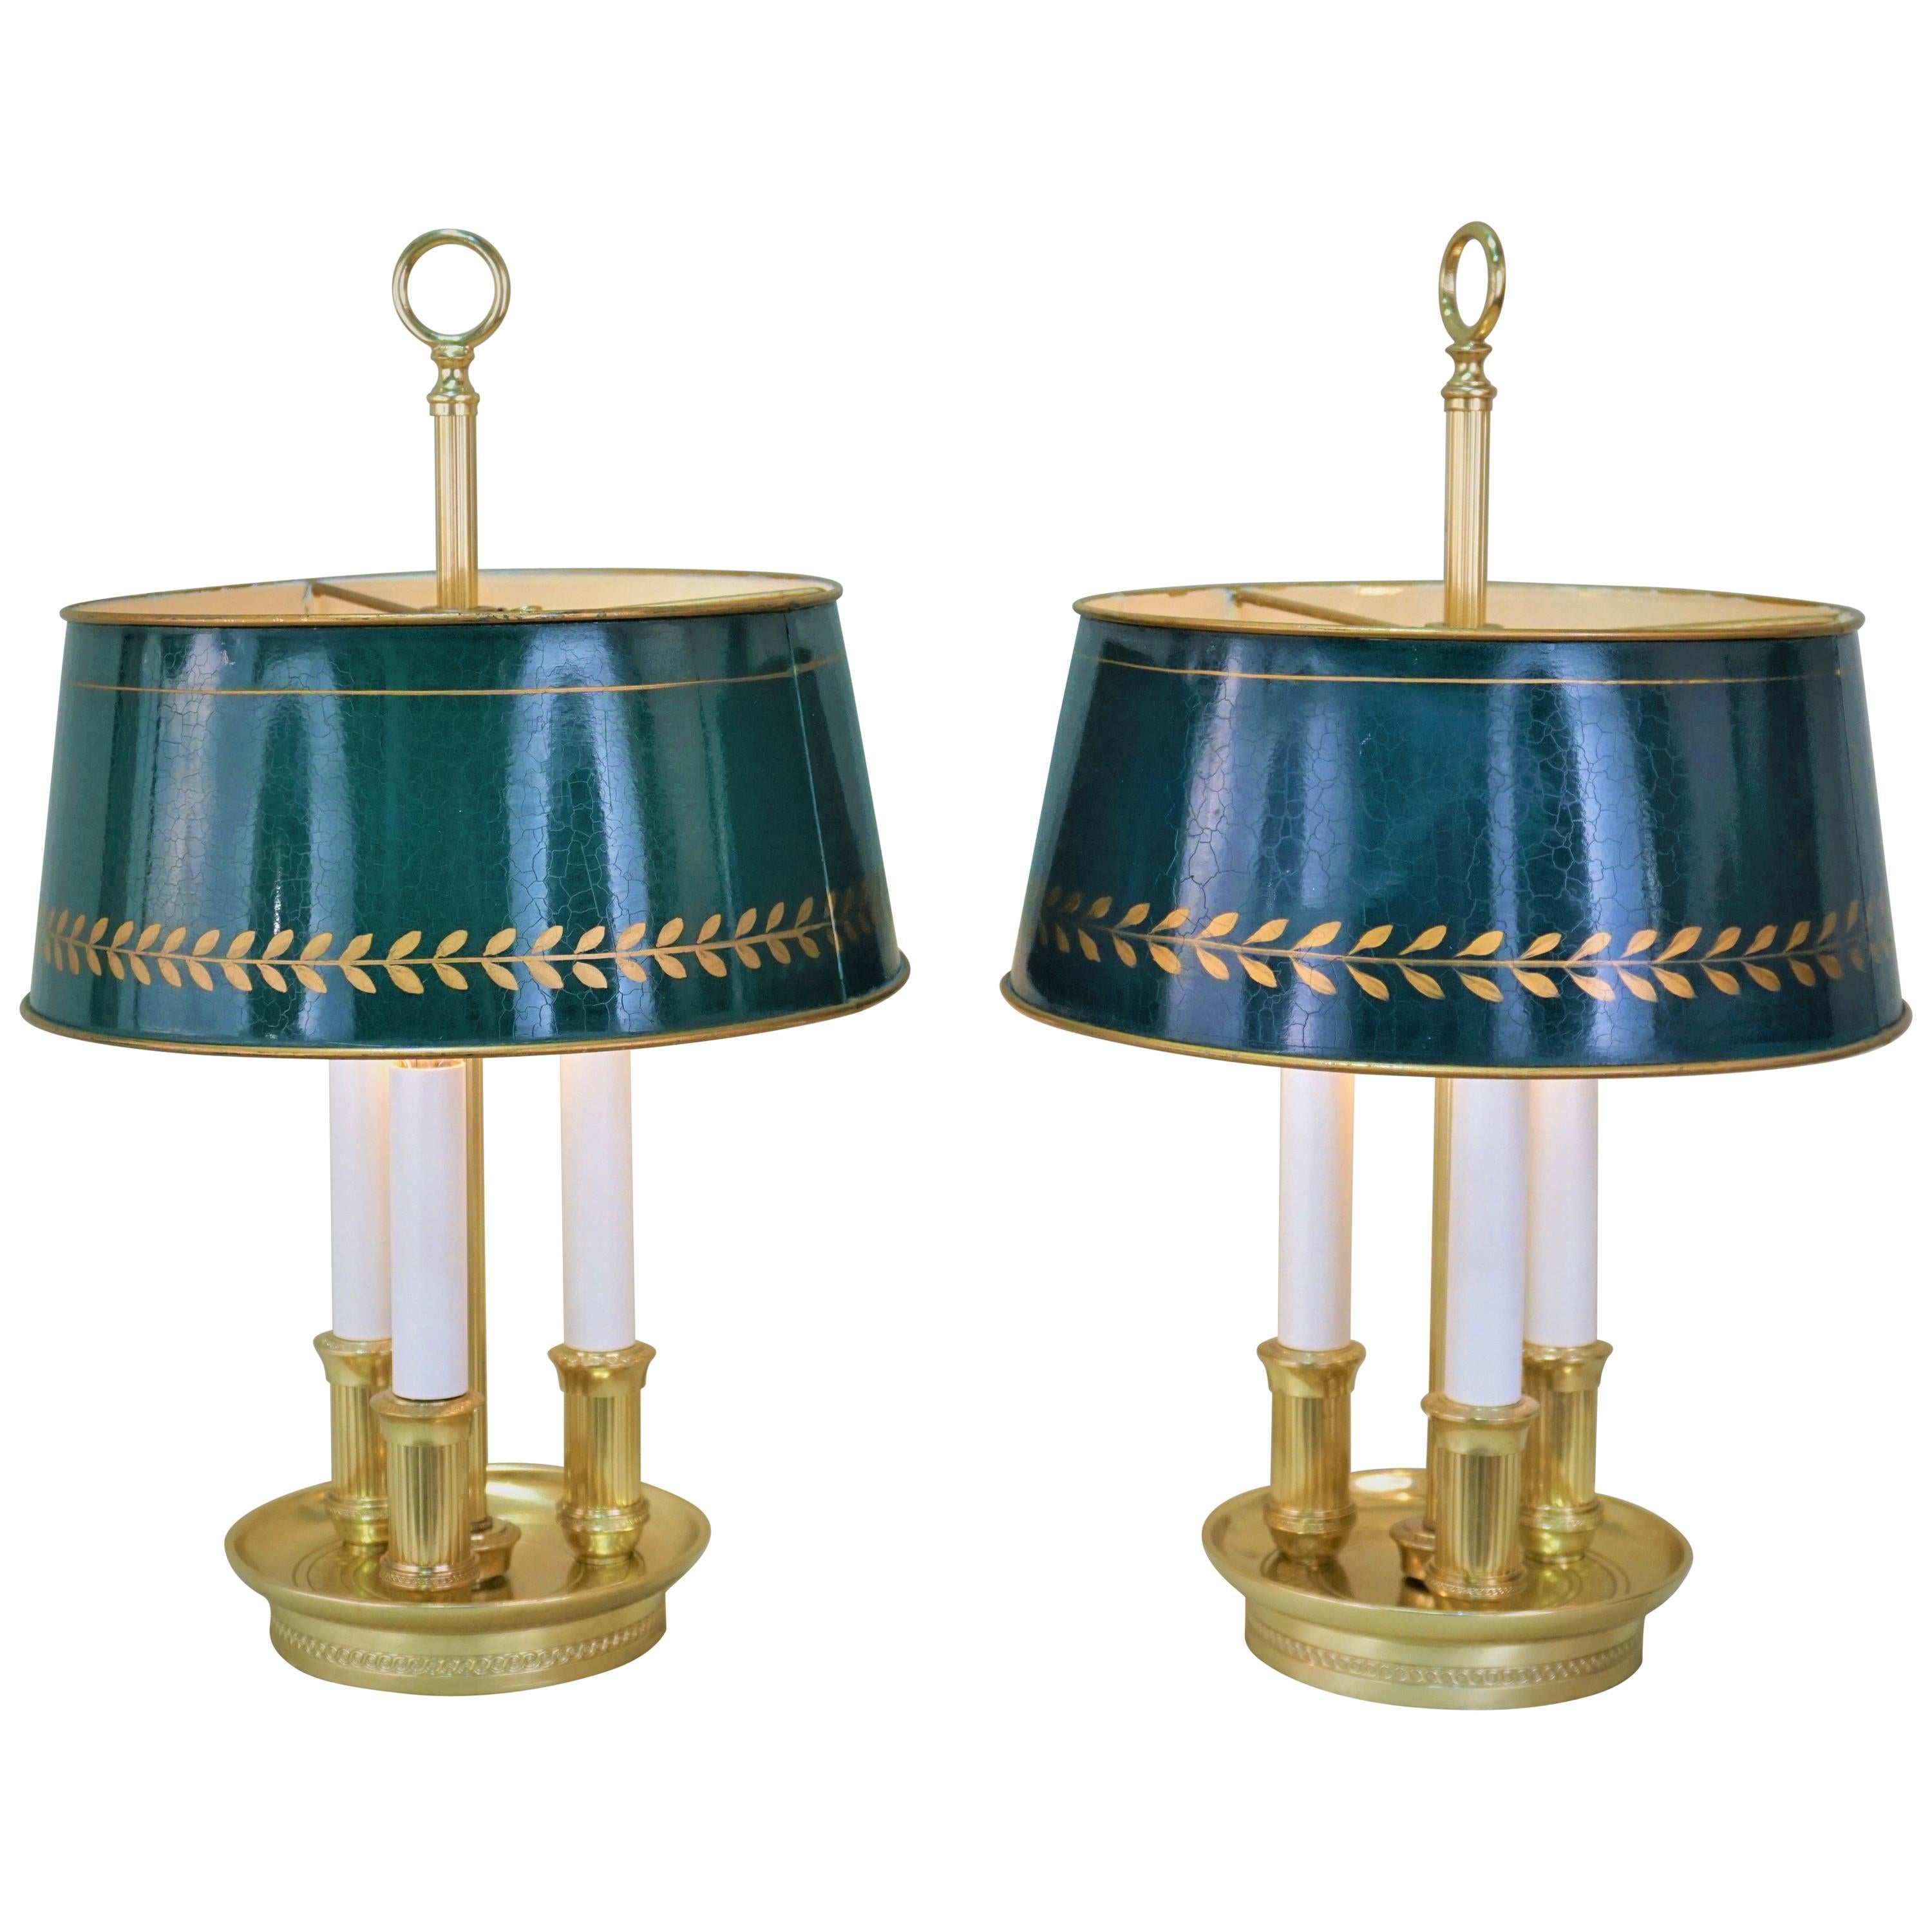 Pair of French Bouillotte Desk Lamps with Tole Shades